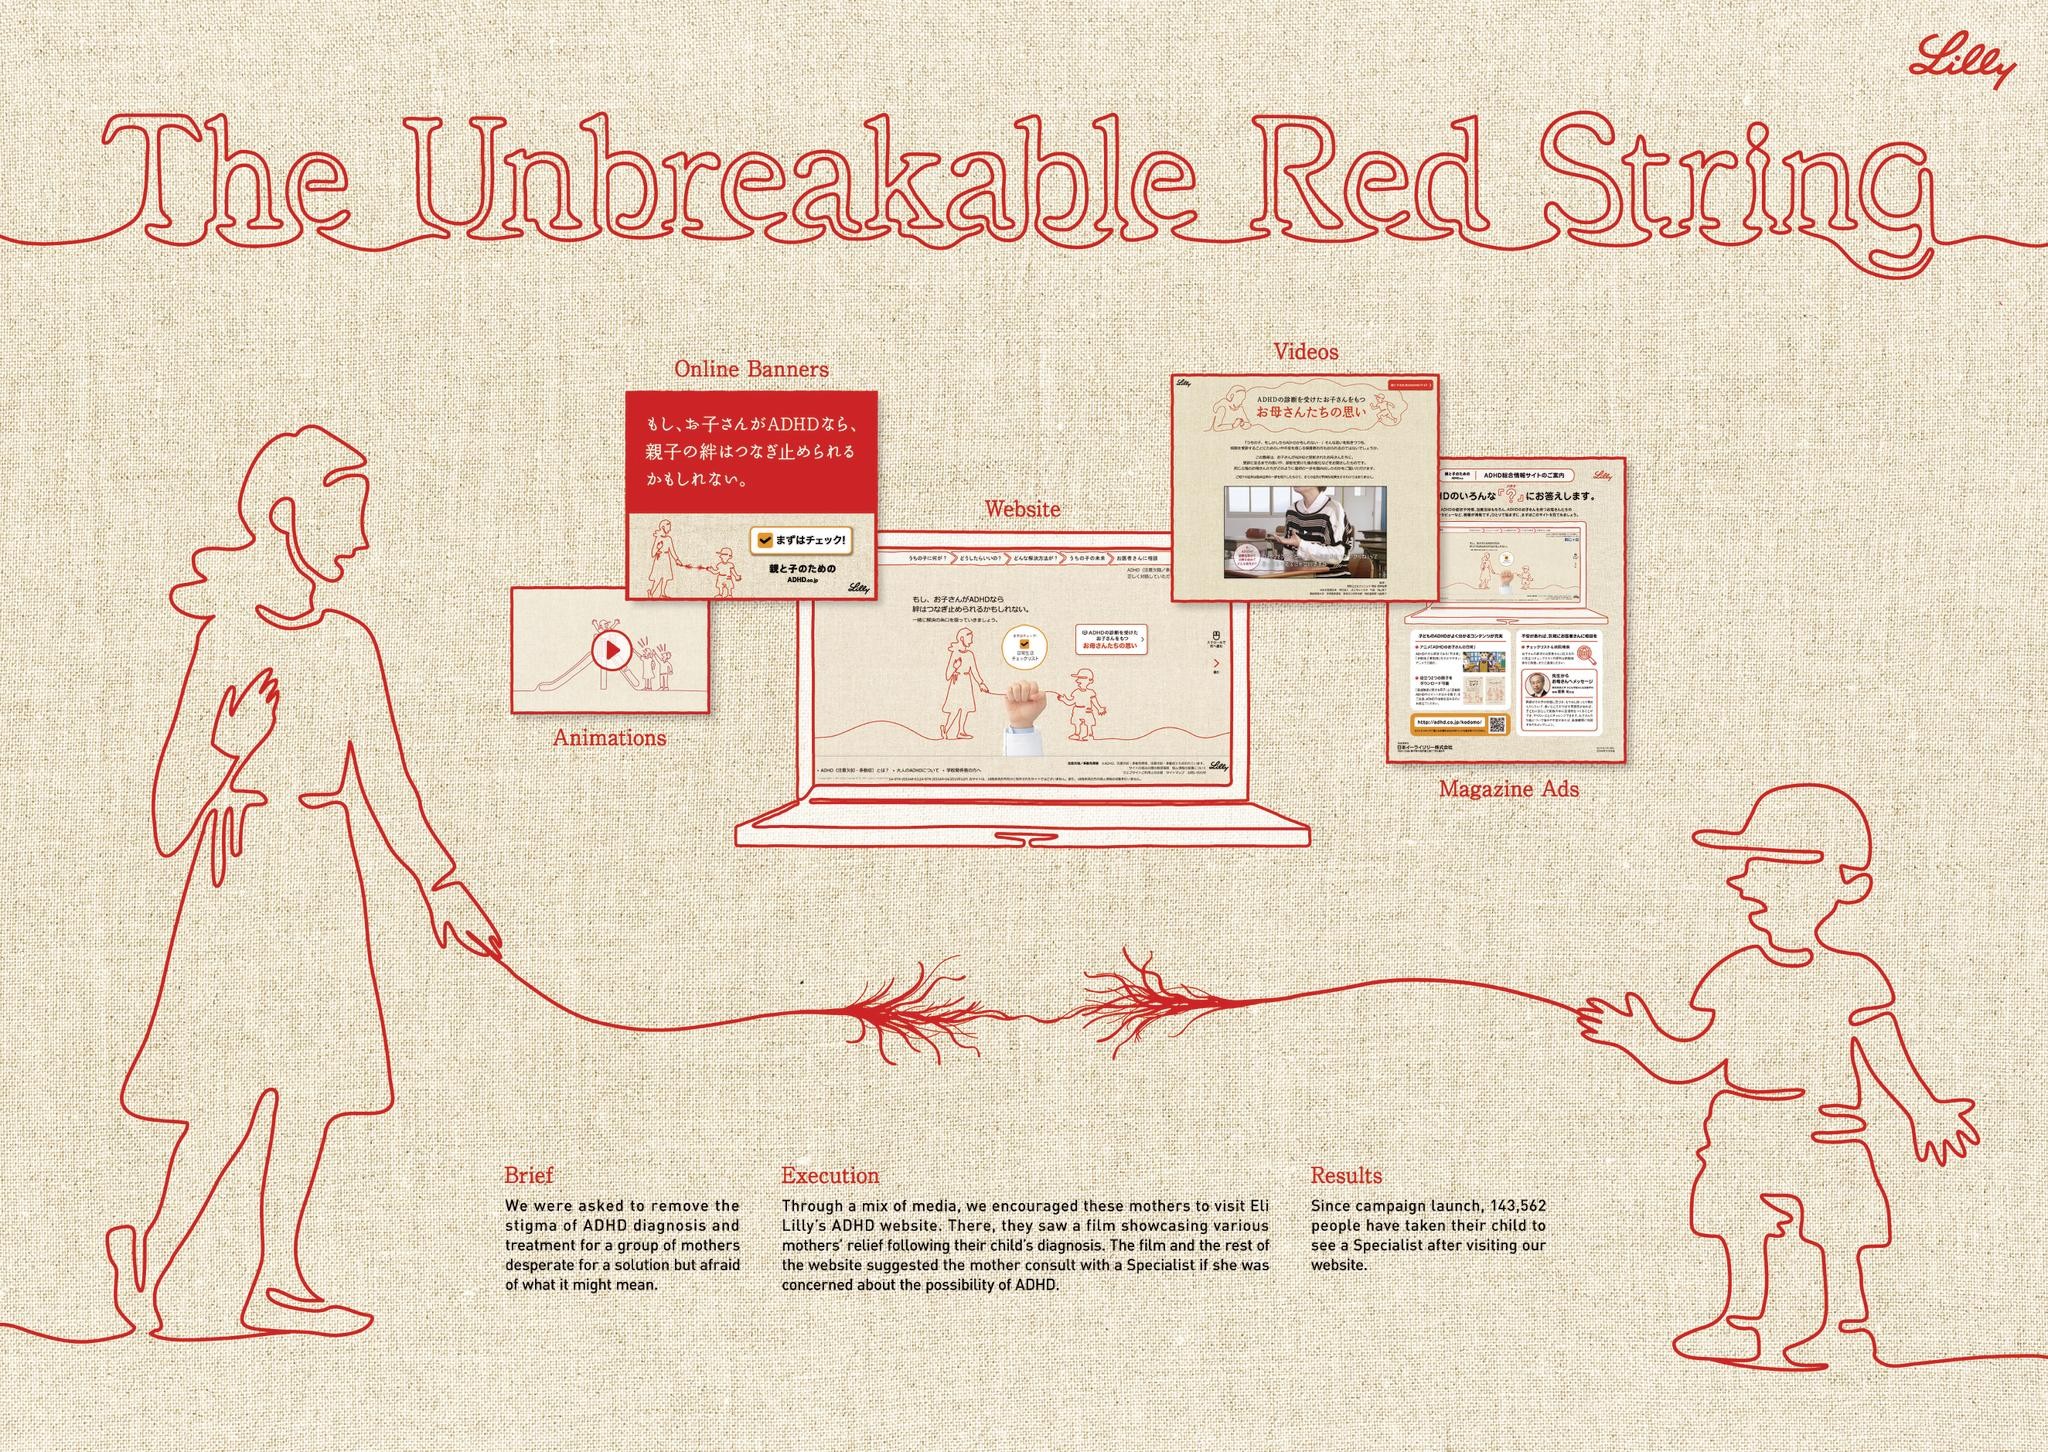 The Unbreakable Red String